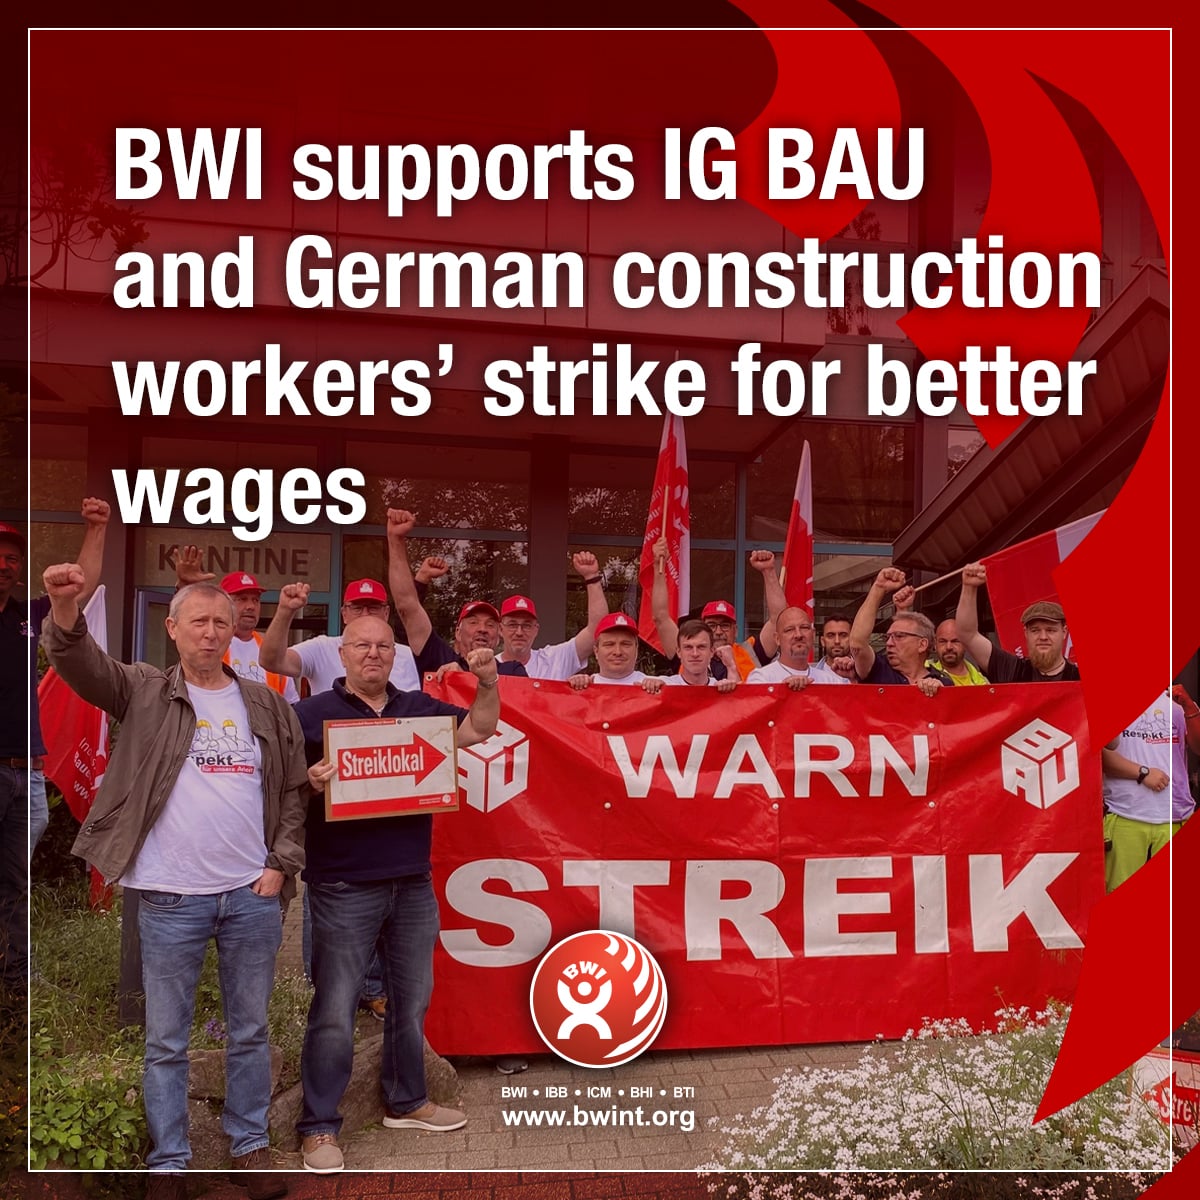 Solidarity w/ @IGBAU & German construction workers in their fight for fair wages. BWI stands firm: unified responses are needed to protect workers' rights. Strike! An injury to one is an injury to all! ✊️💪👷👷‍♀️ deine.igbau.de/baustreik?fbcl…